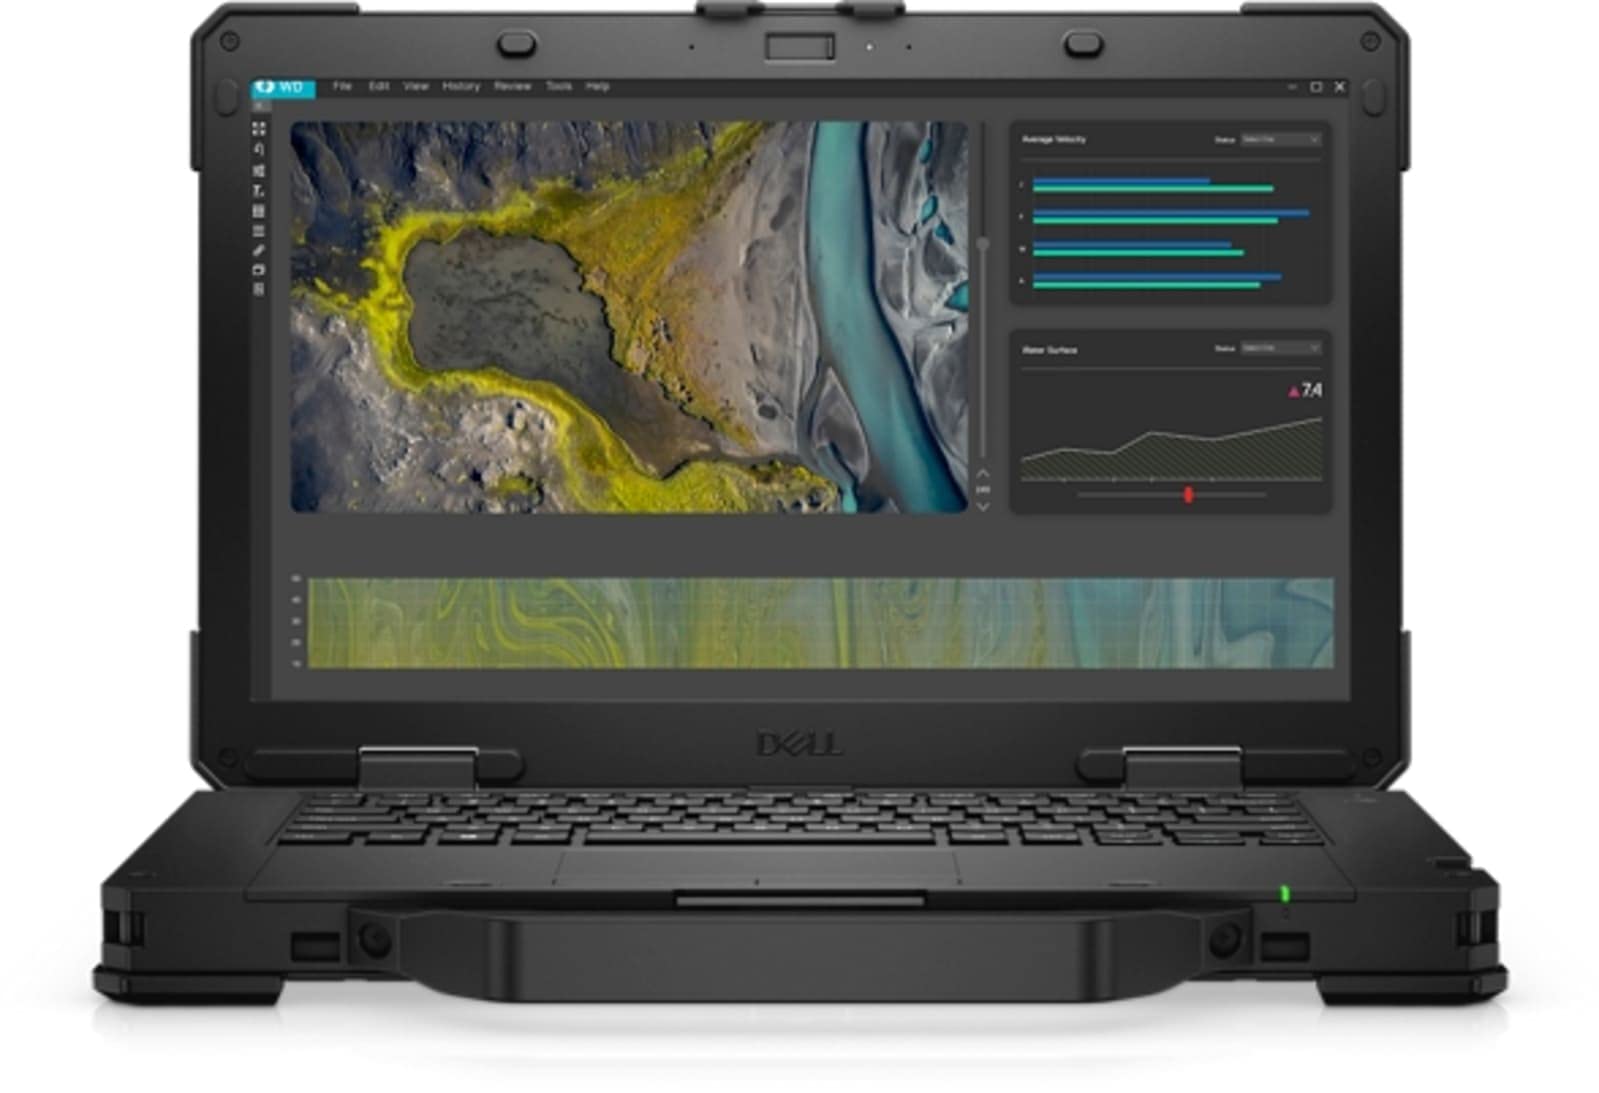 Dell Latitude Rugged 14 5430 Laptop (2022) | 14" FHD Touch | Core i5 - 1TB SSD - 16GB RAM | 4 Cores @ 4.2 GHz - 11th Gen CPU Win 11 Pro (Renewed)